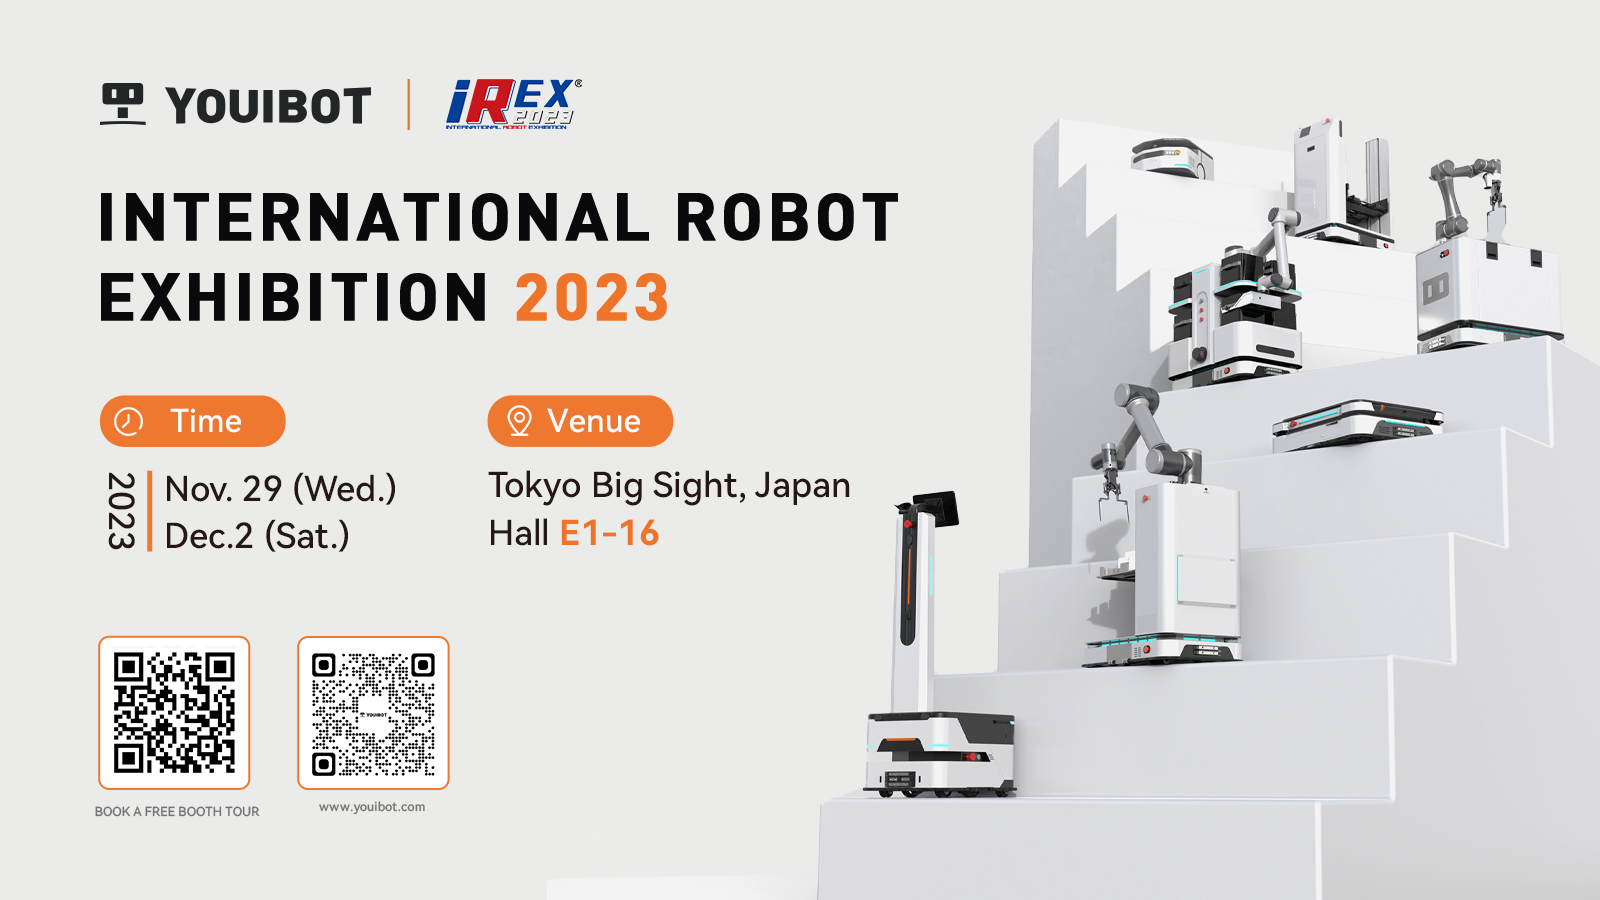 Join Youibot at iREX 2023